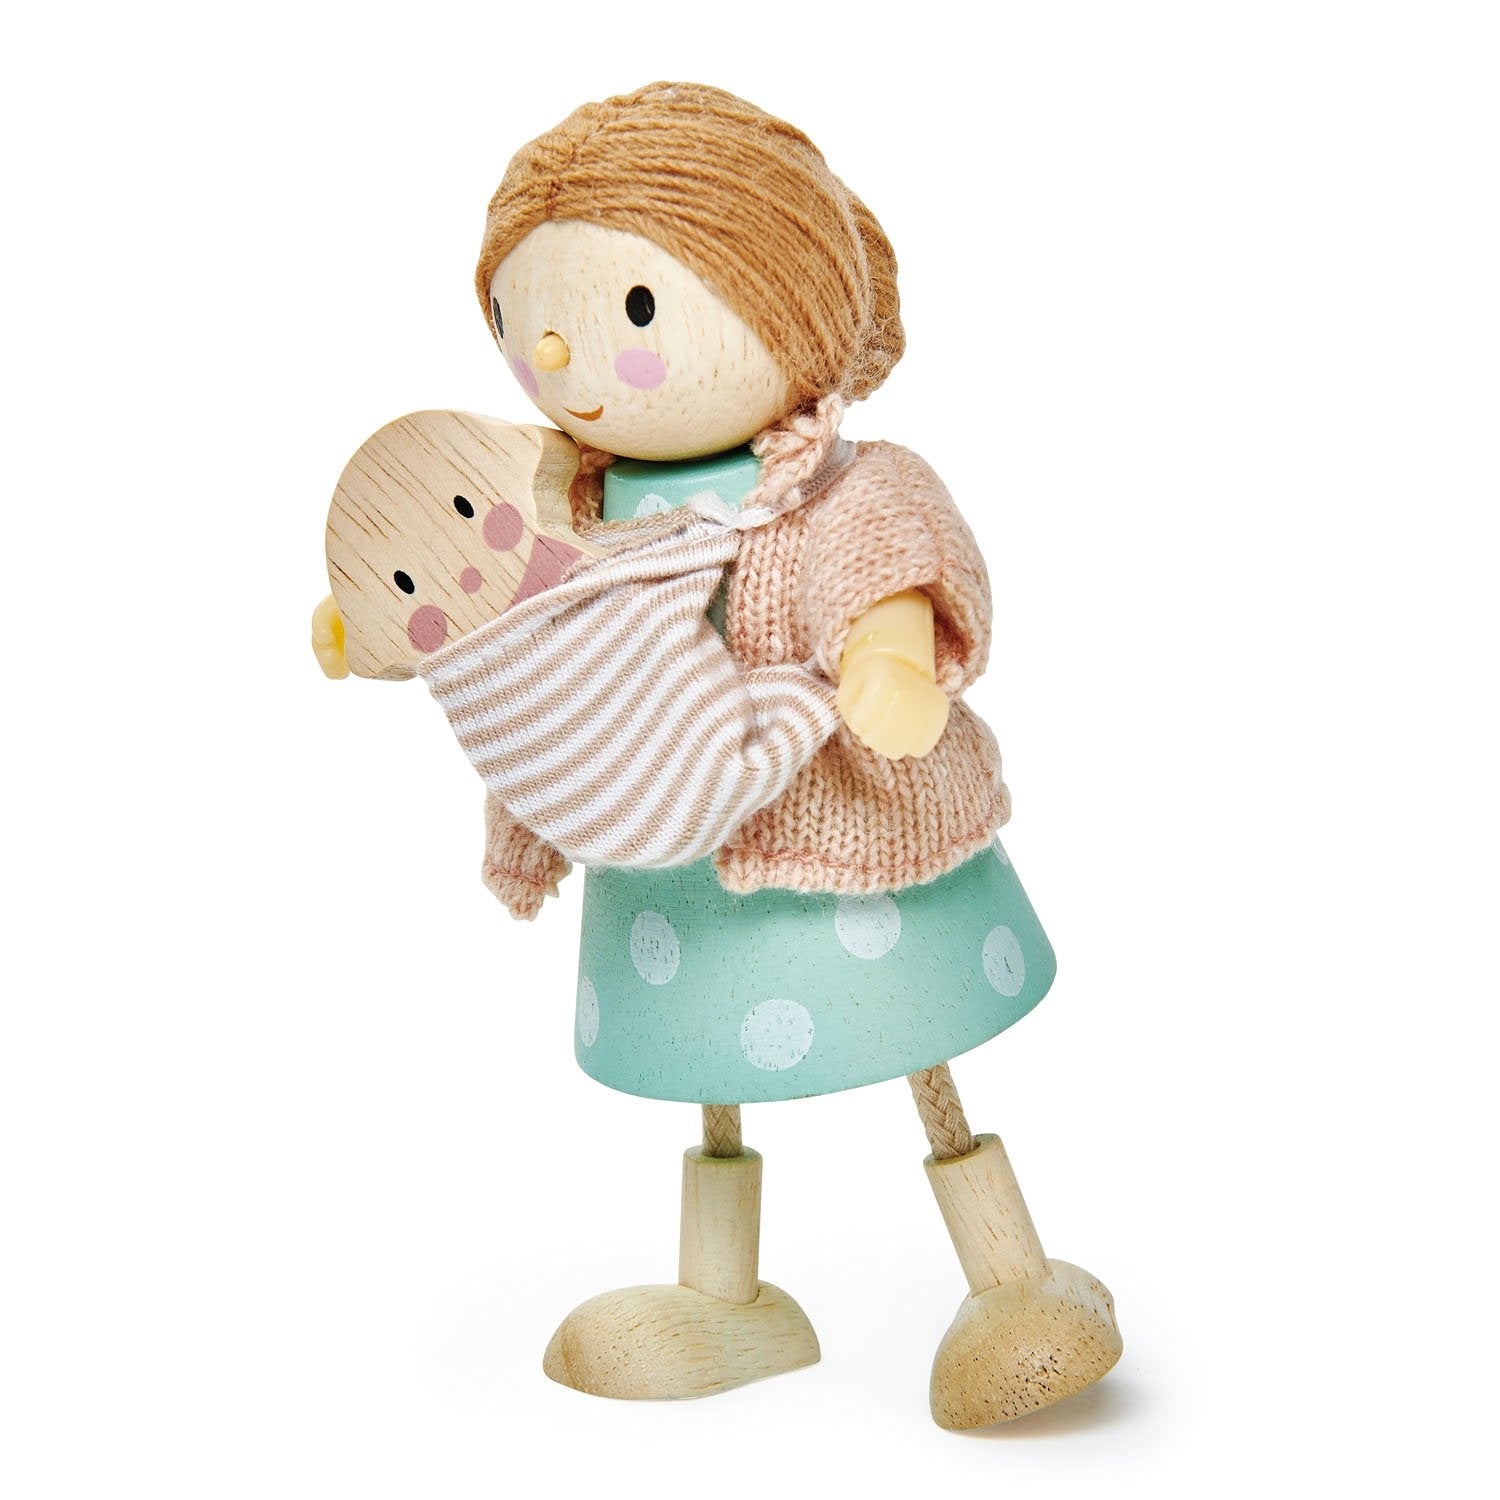 Tender Leaf Toys Wooden Doll Set - Mrs Goodwin and Baby